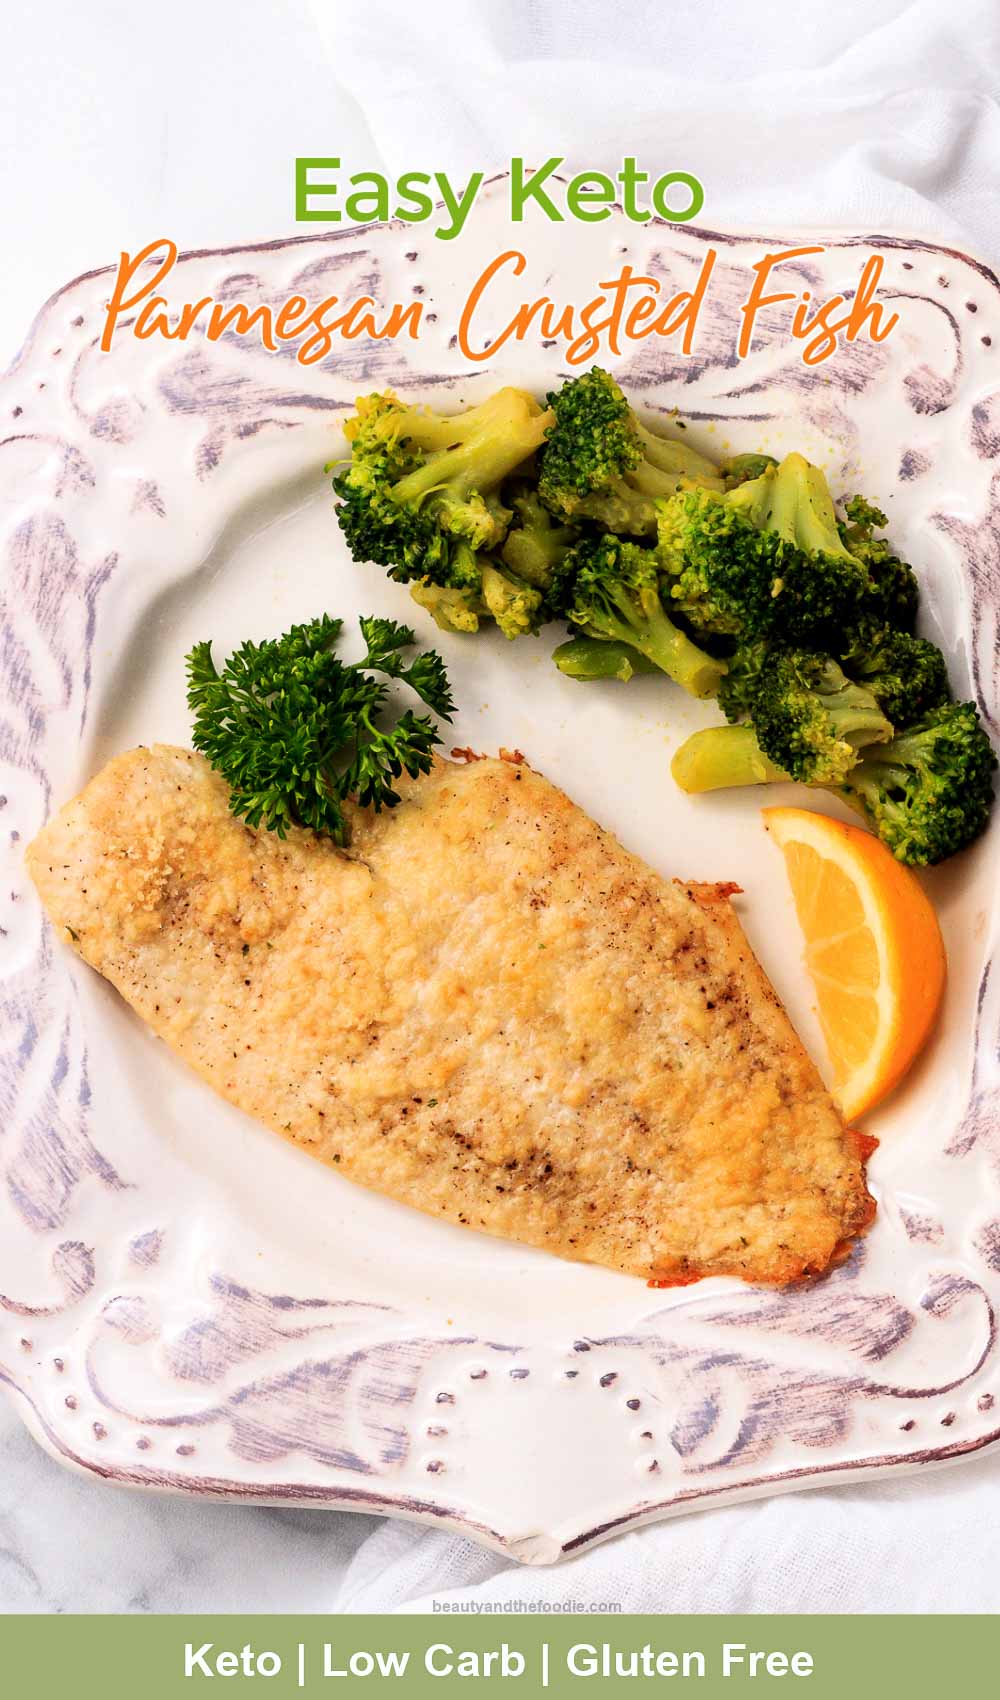 One low carb breaded parmesan cruste flounder fish fillet with broccoli.